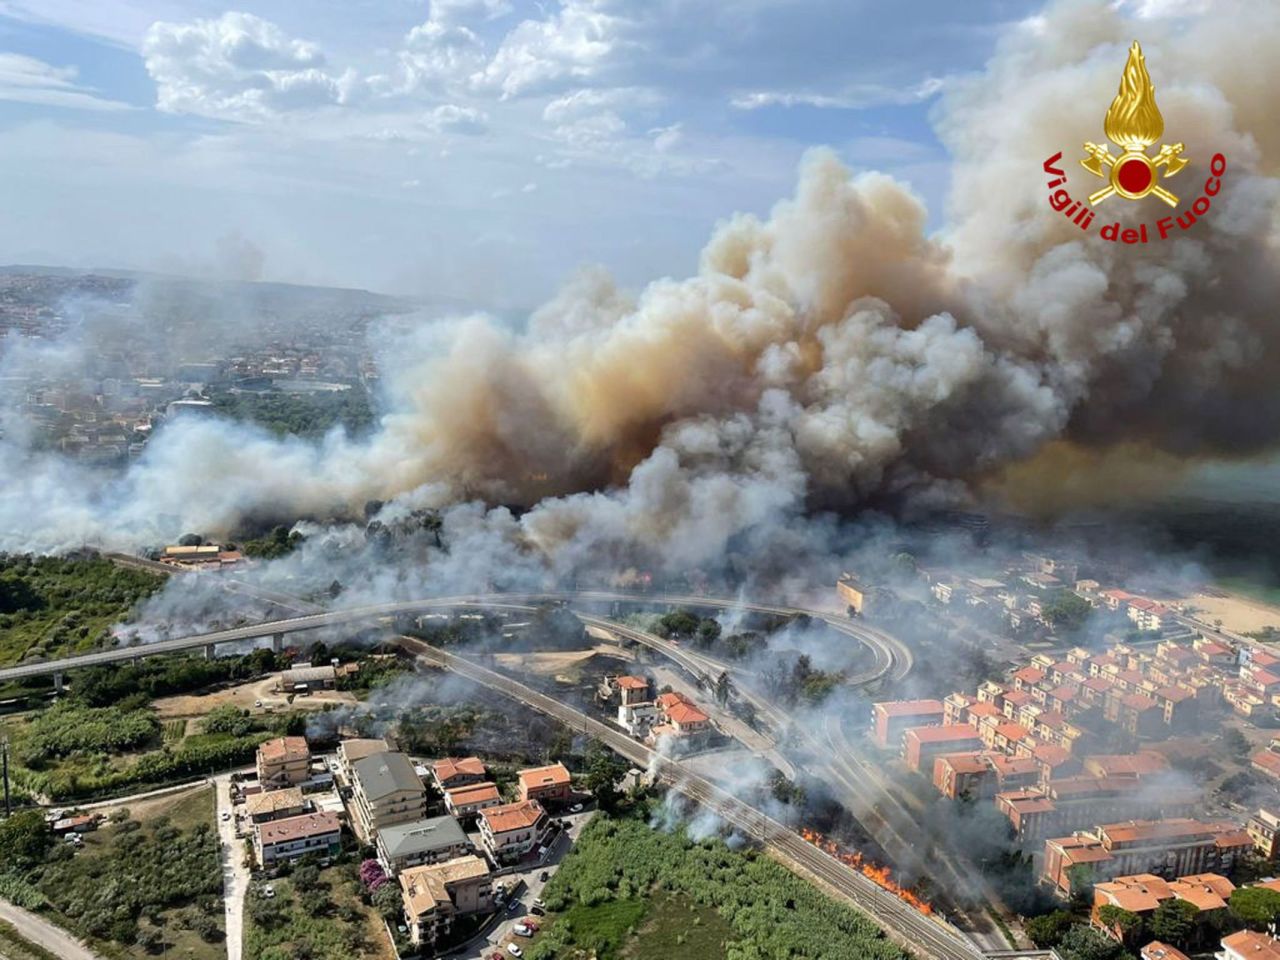 A handout photo from the Italian National Fire Brigade shows an aerial view of a fire in the Pineta Dannunziana reserve in Pescara, Italy, on August 1.